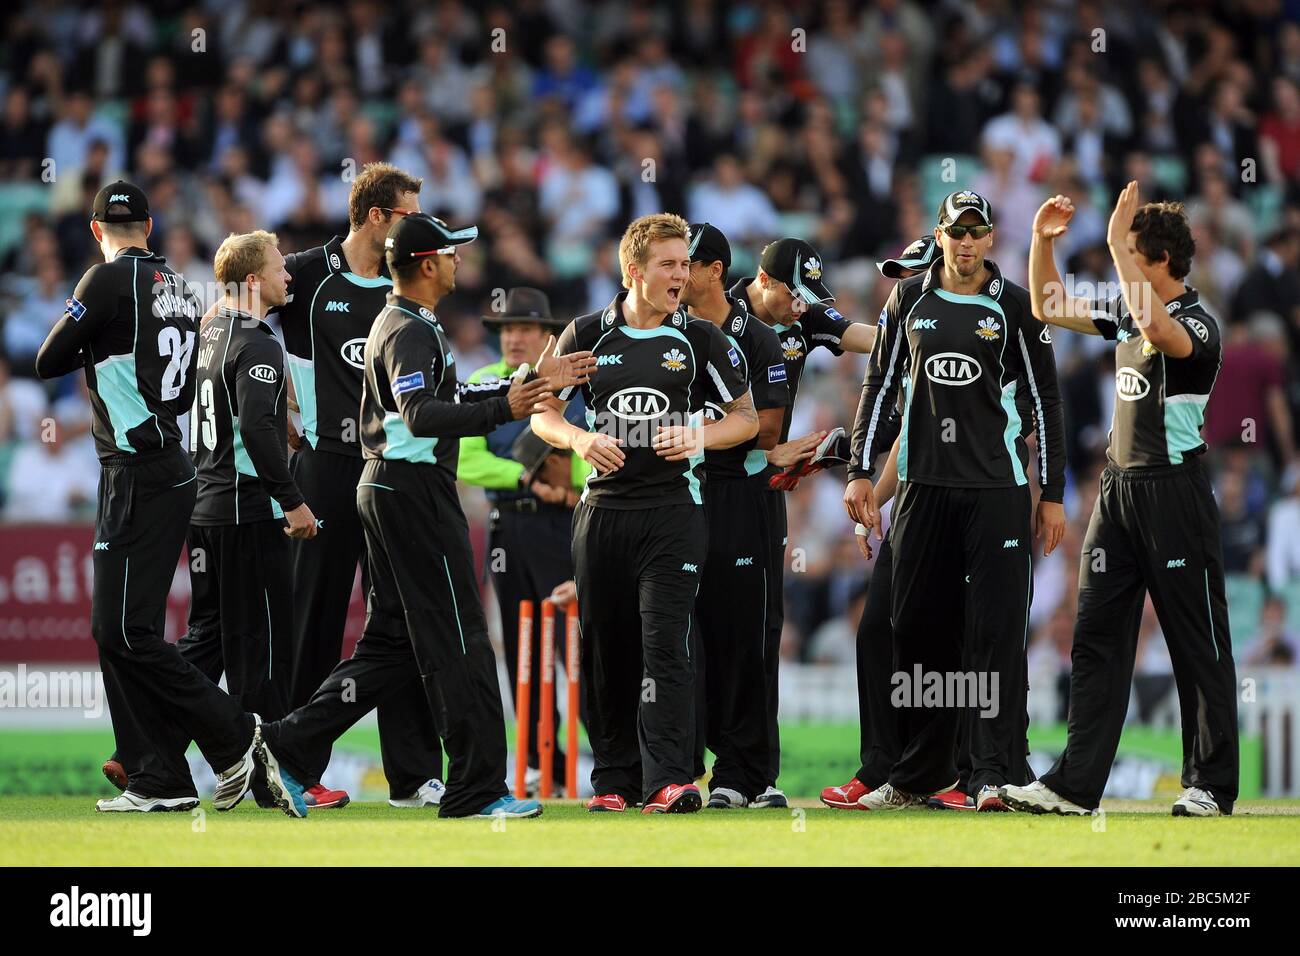 Surrey Lions players celebrate the wicket of Kent Spitfires' Azhar Mahmood Stock Photo